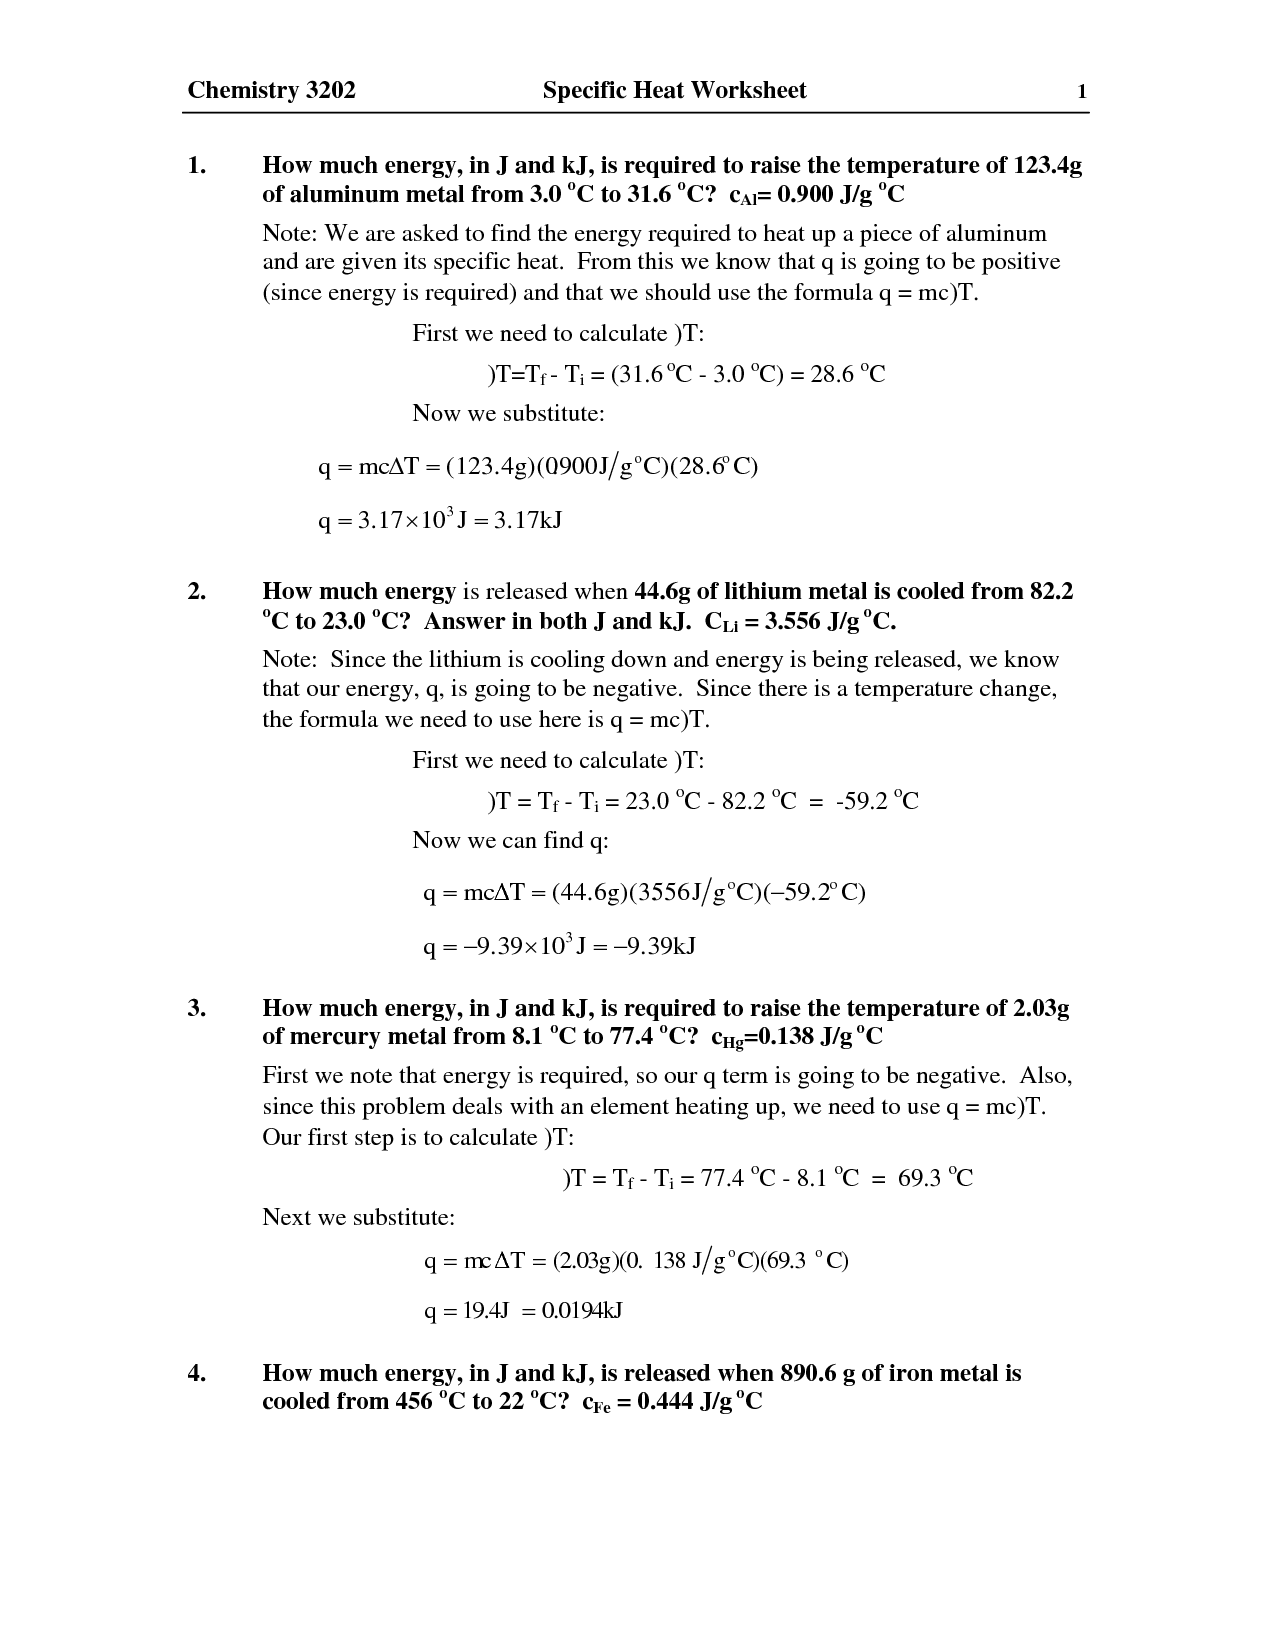 Specific Heat Problems Chemistry Worksheet Answers Image